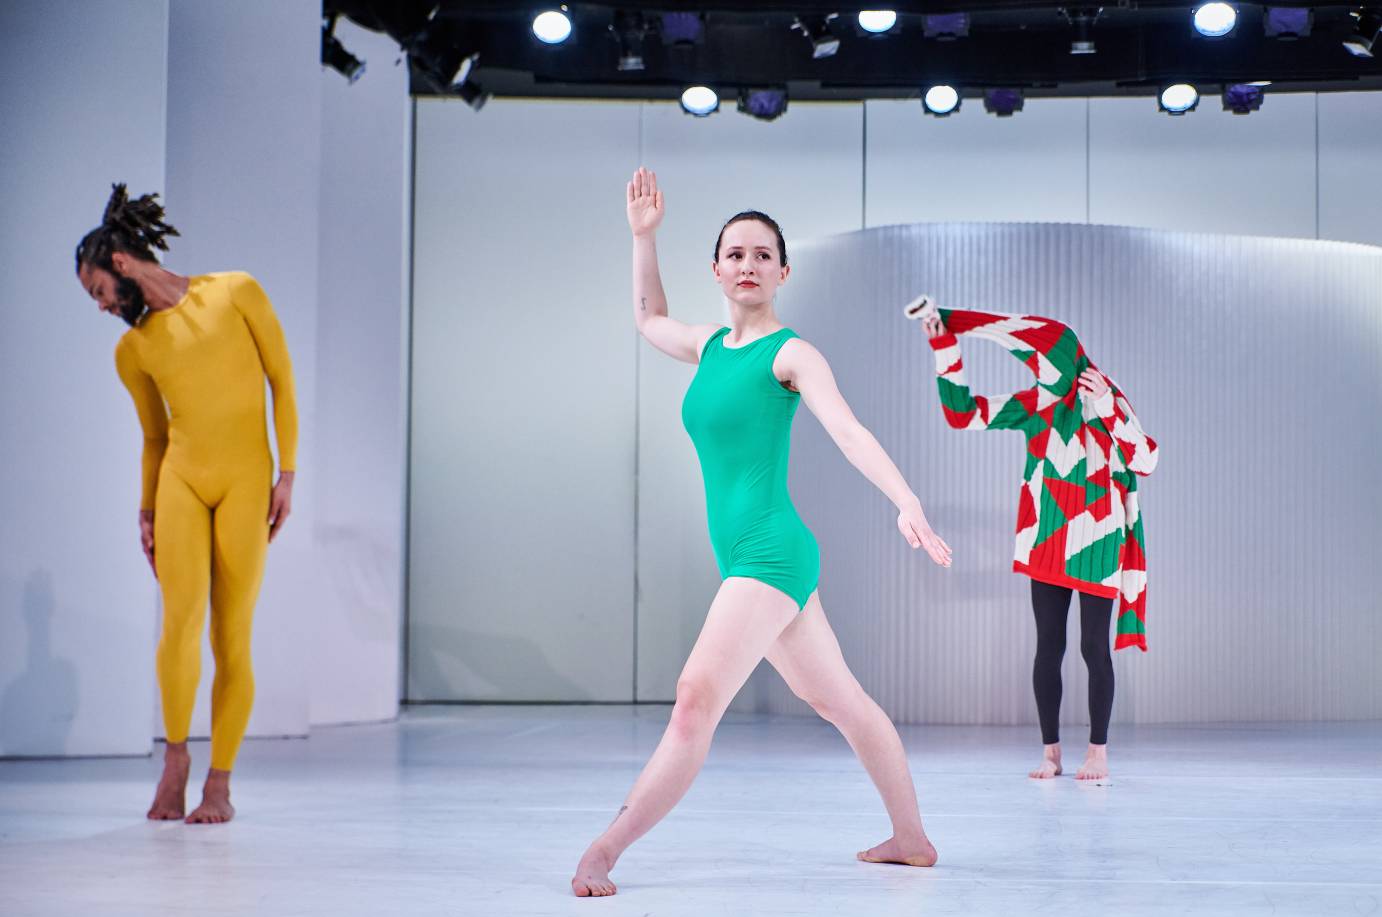 A man with a Christmas sweater stands behind two dancers